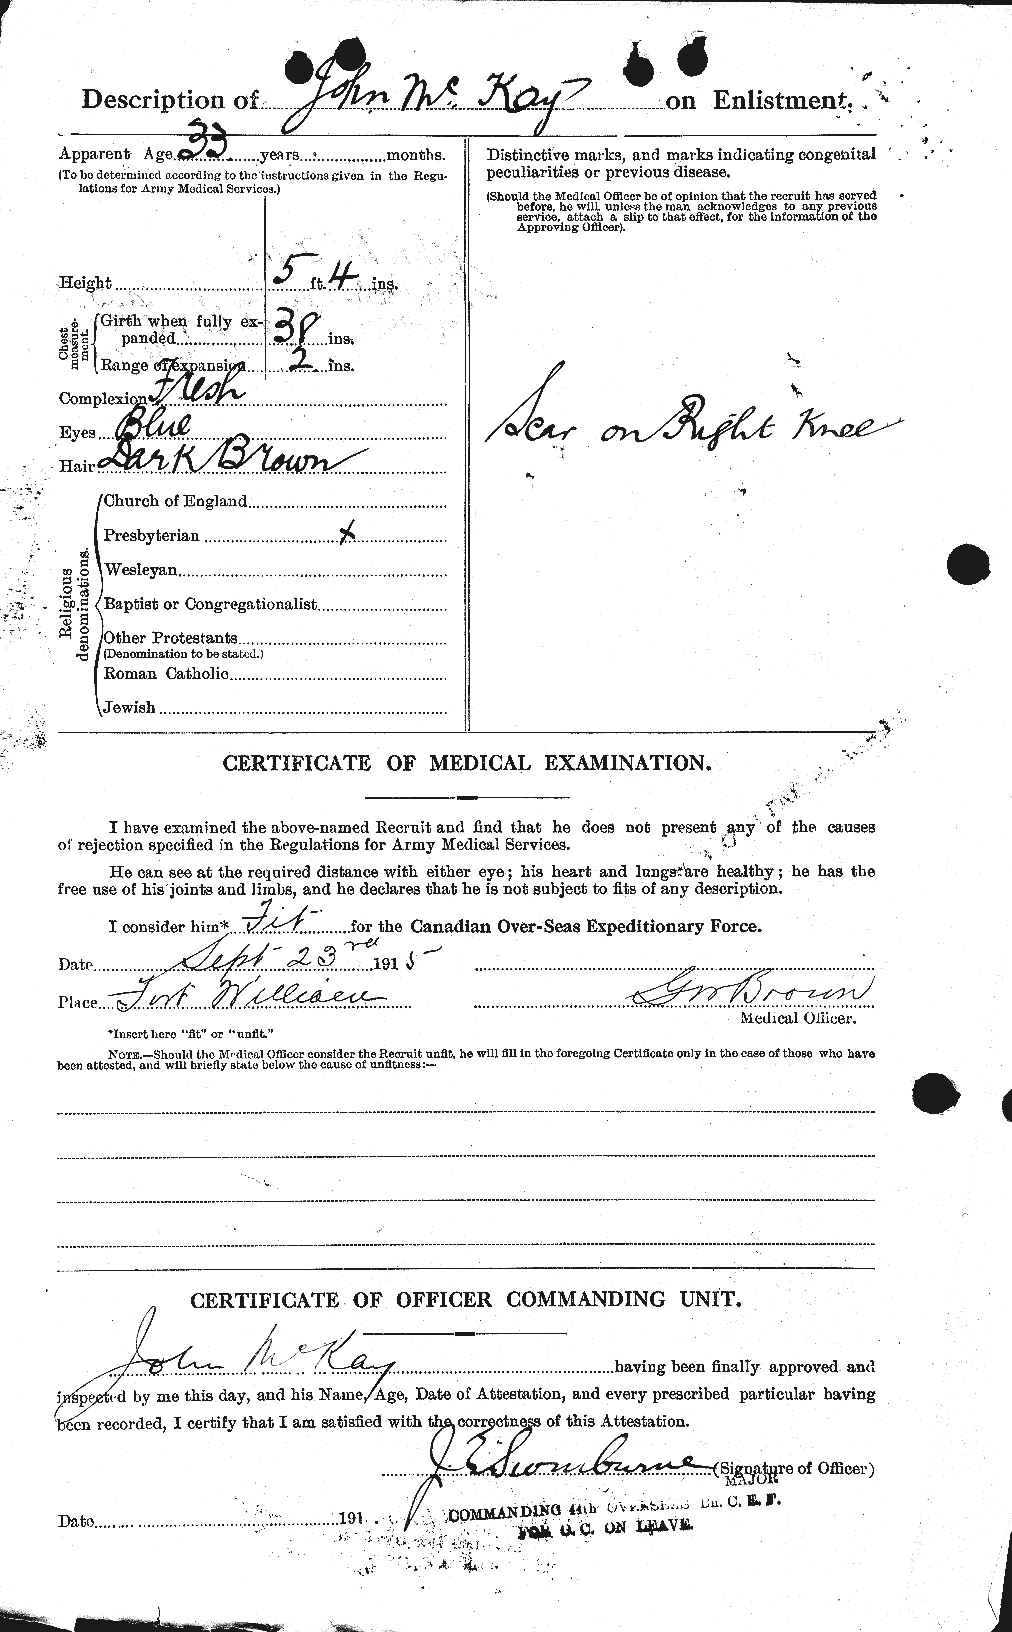 Personnel Records of the First World War - CEF 527048b